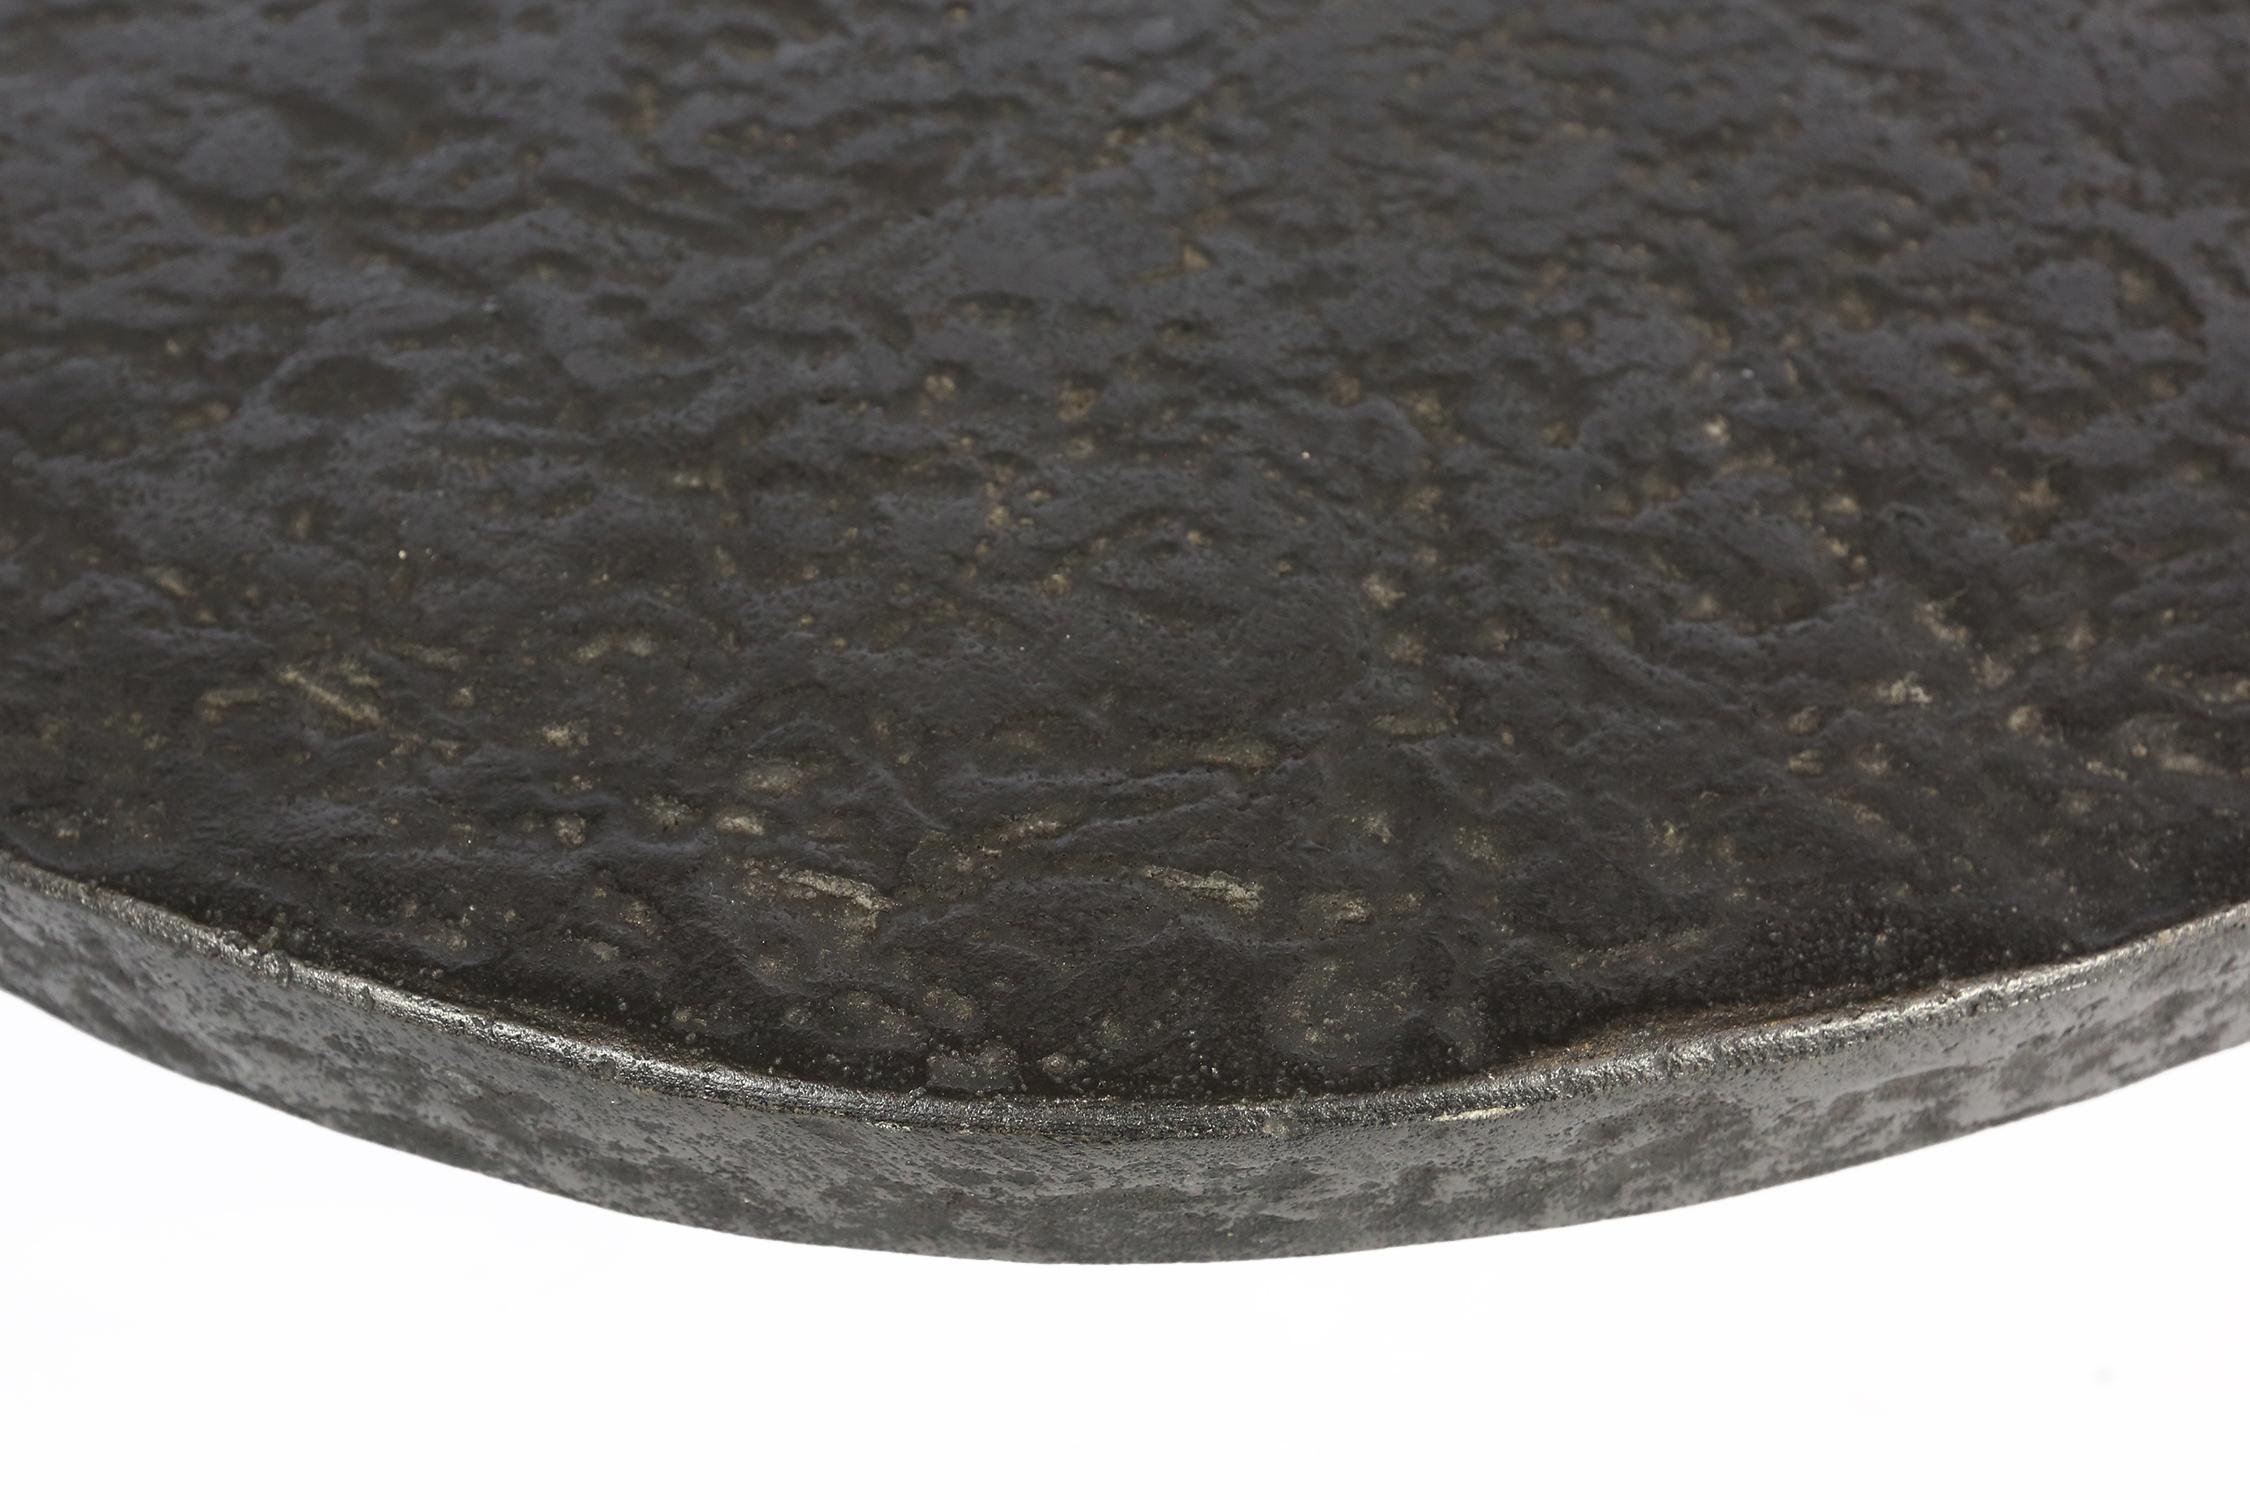 This robust coffee or cocktail table is from the 1970s and probably made in Belgium
This table was made of pulverized and molded graphite stone mixed with resin. Its a very nice and solid quality table with nice pattern on the surface. Looks like